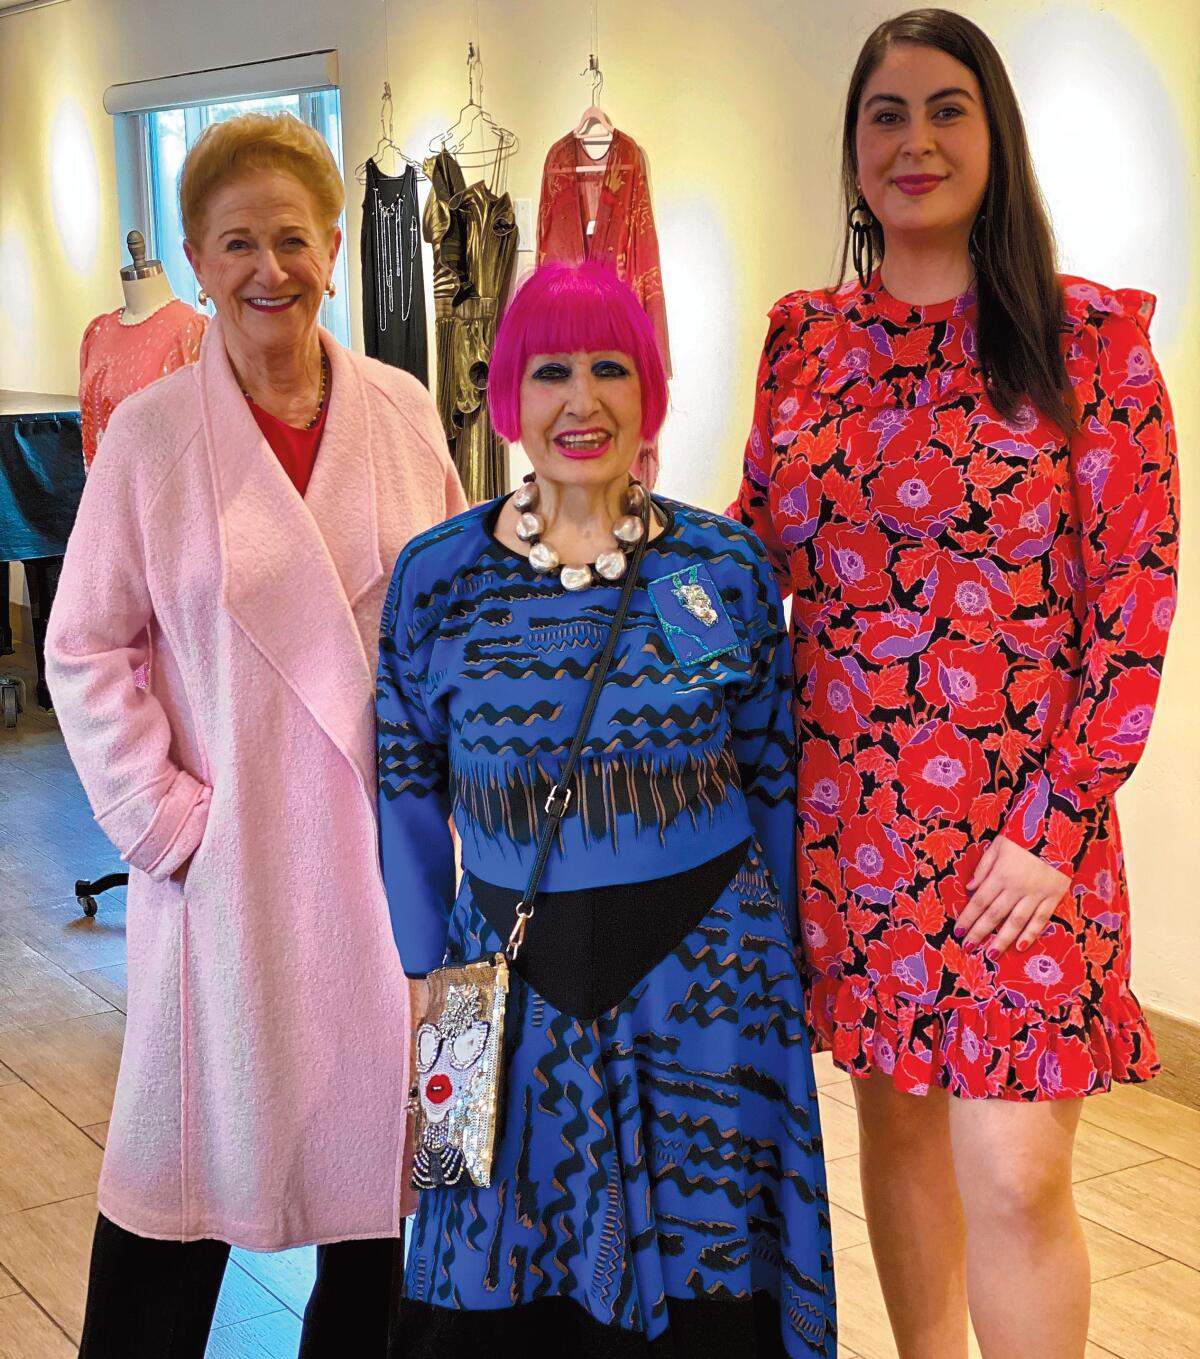 Fashion designer Zandra Rhodes (center) poses with Distinguished Speaker Series underwriter Judy White (left), and La Jolla Community Center executive director Nancy Walters. Rhodes was the featured presenter at La Jolla Community Center's Distinguished Speaker Series on March 3, 2020.